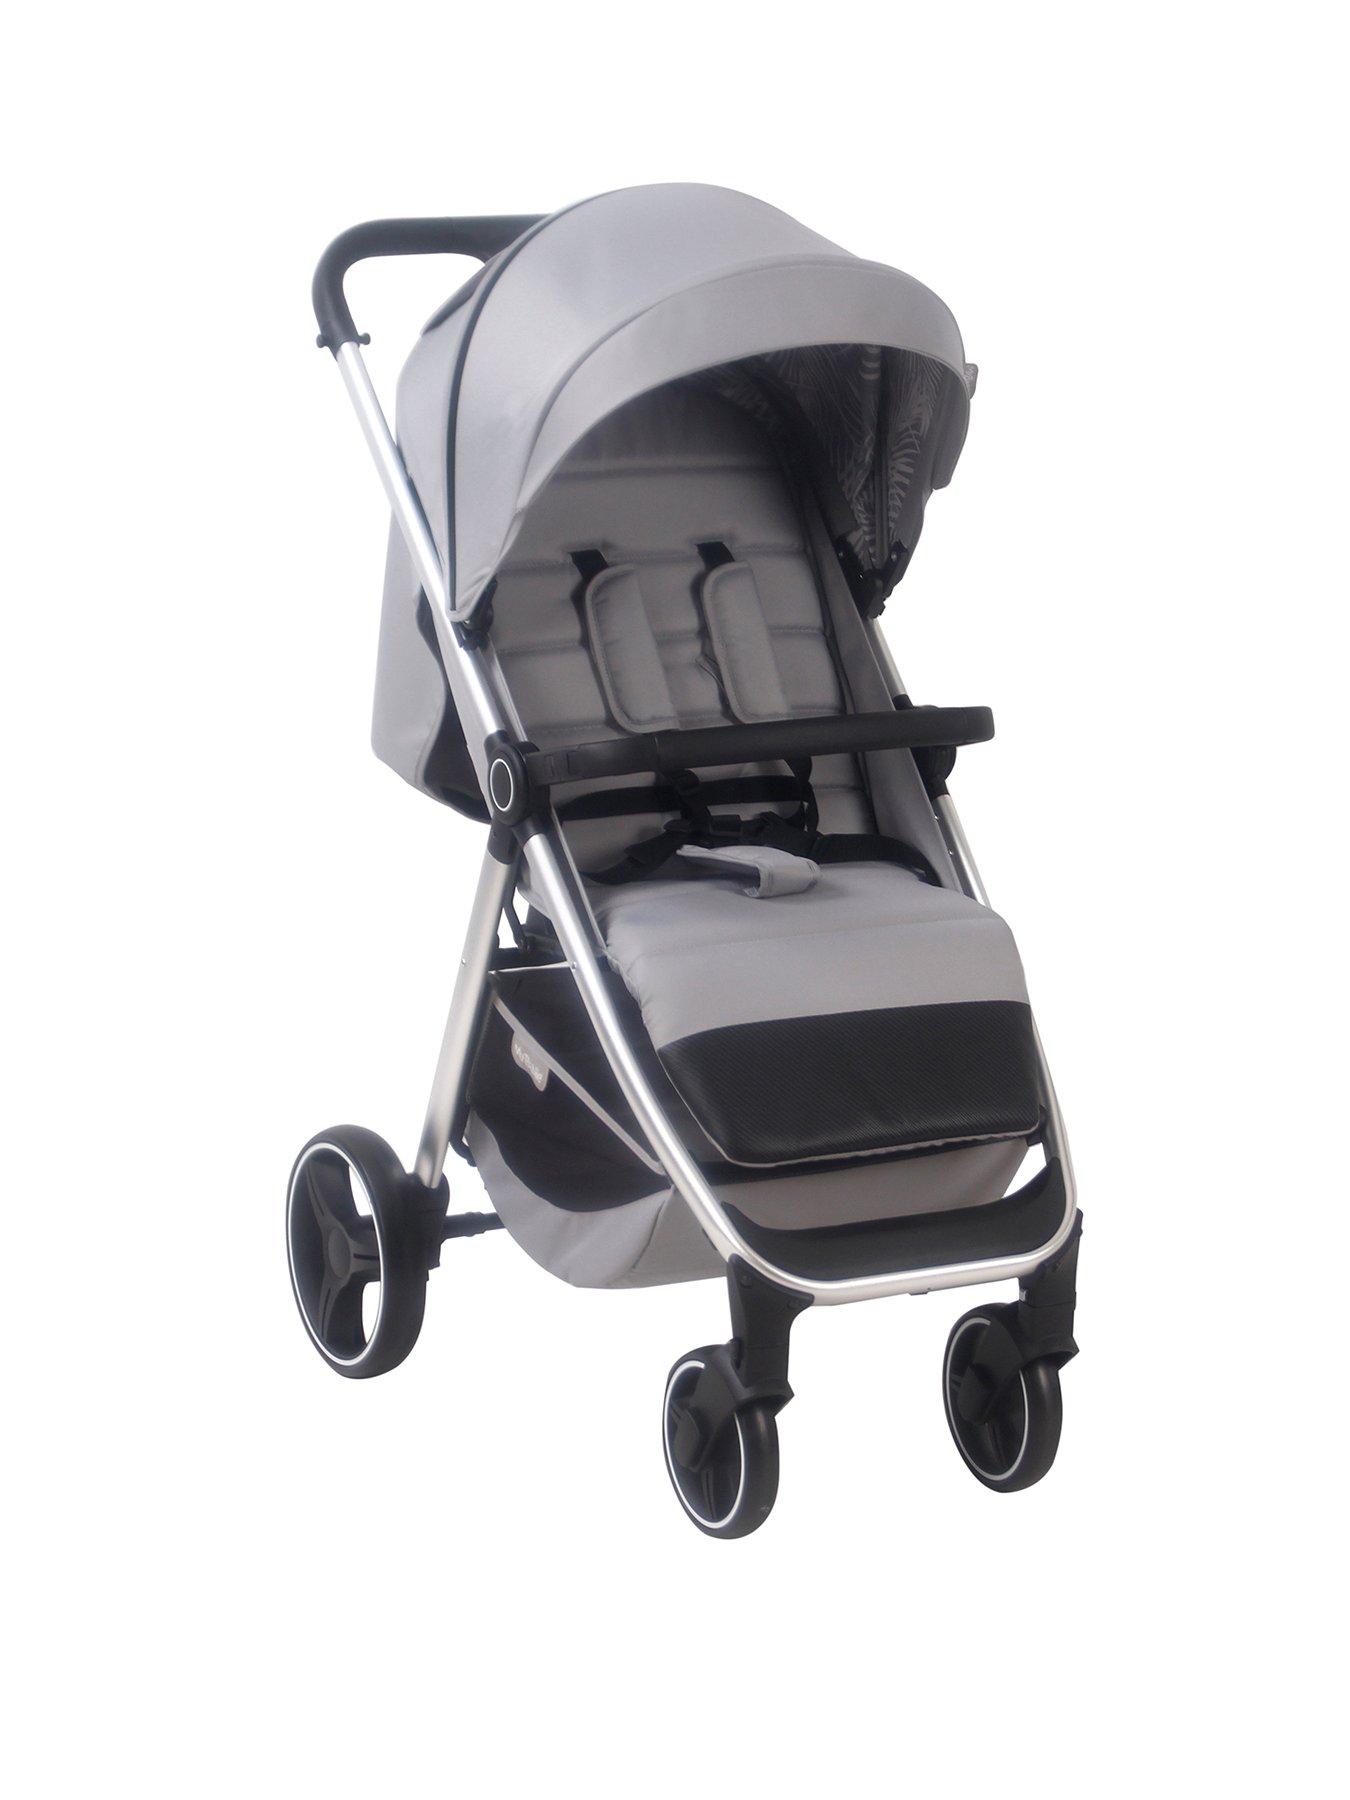 Silver Cross Clic stroller review - Lightweight buggies & strollers -  Pushchairs